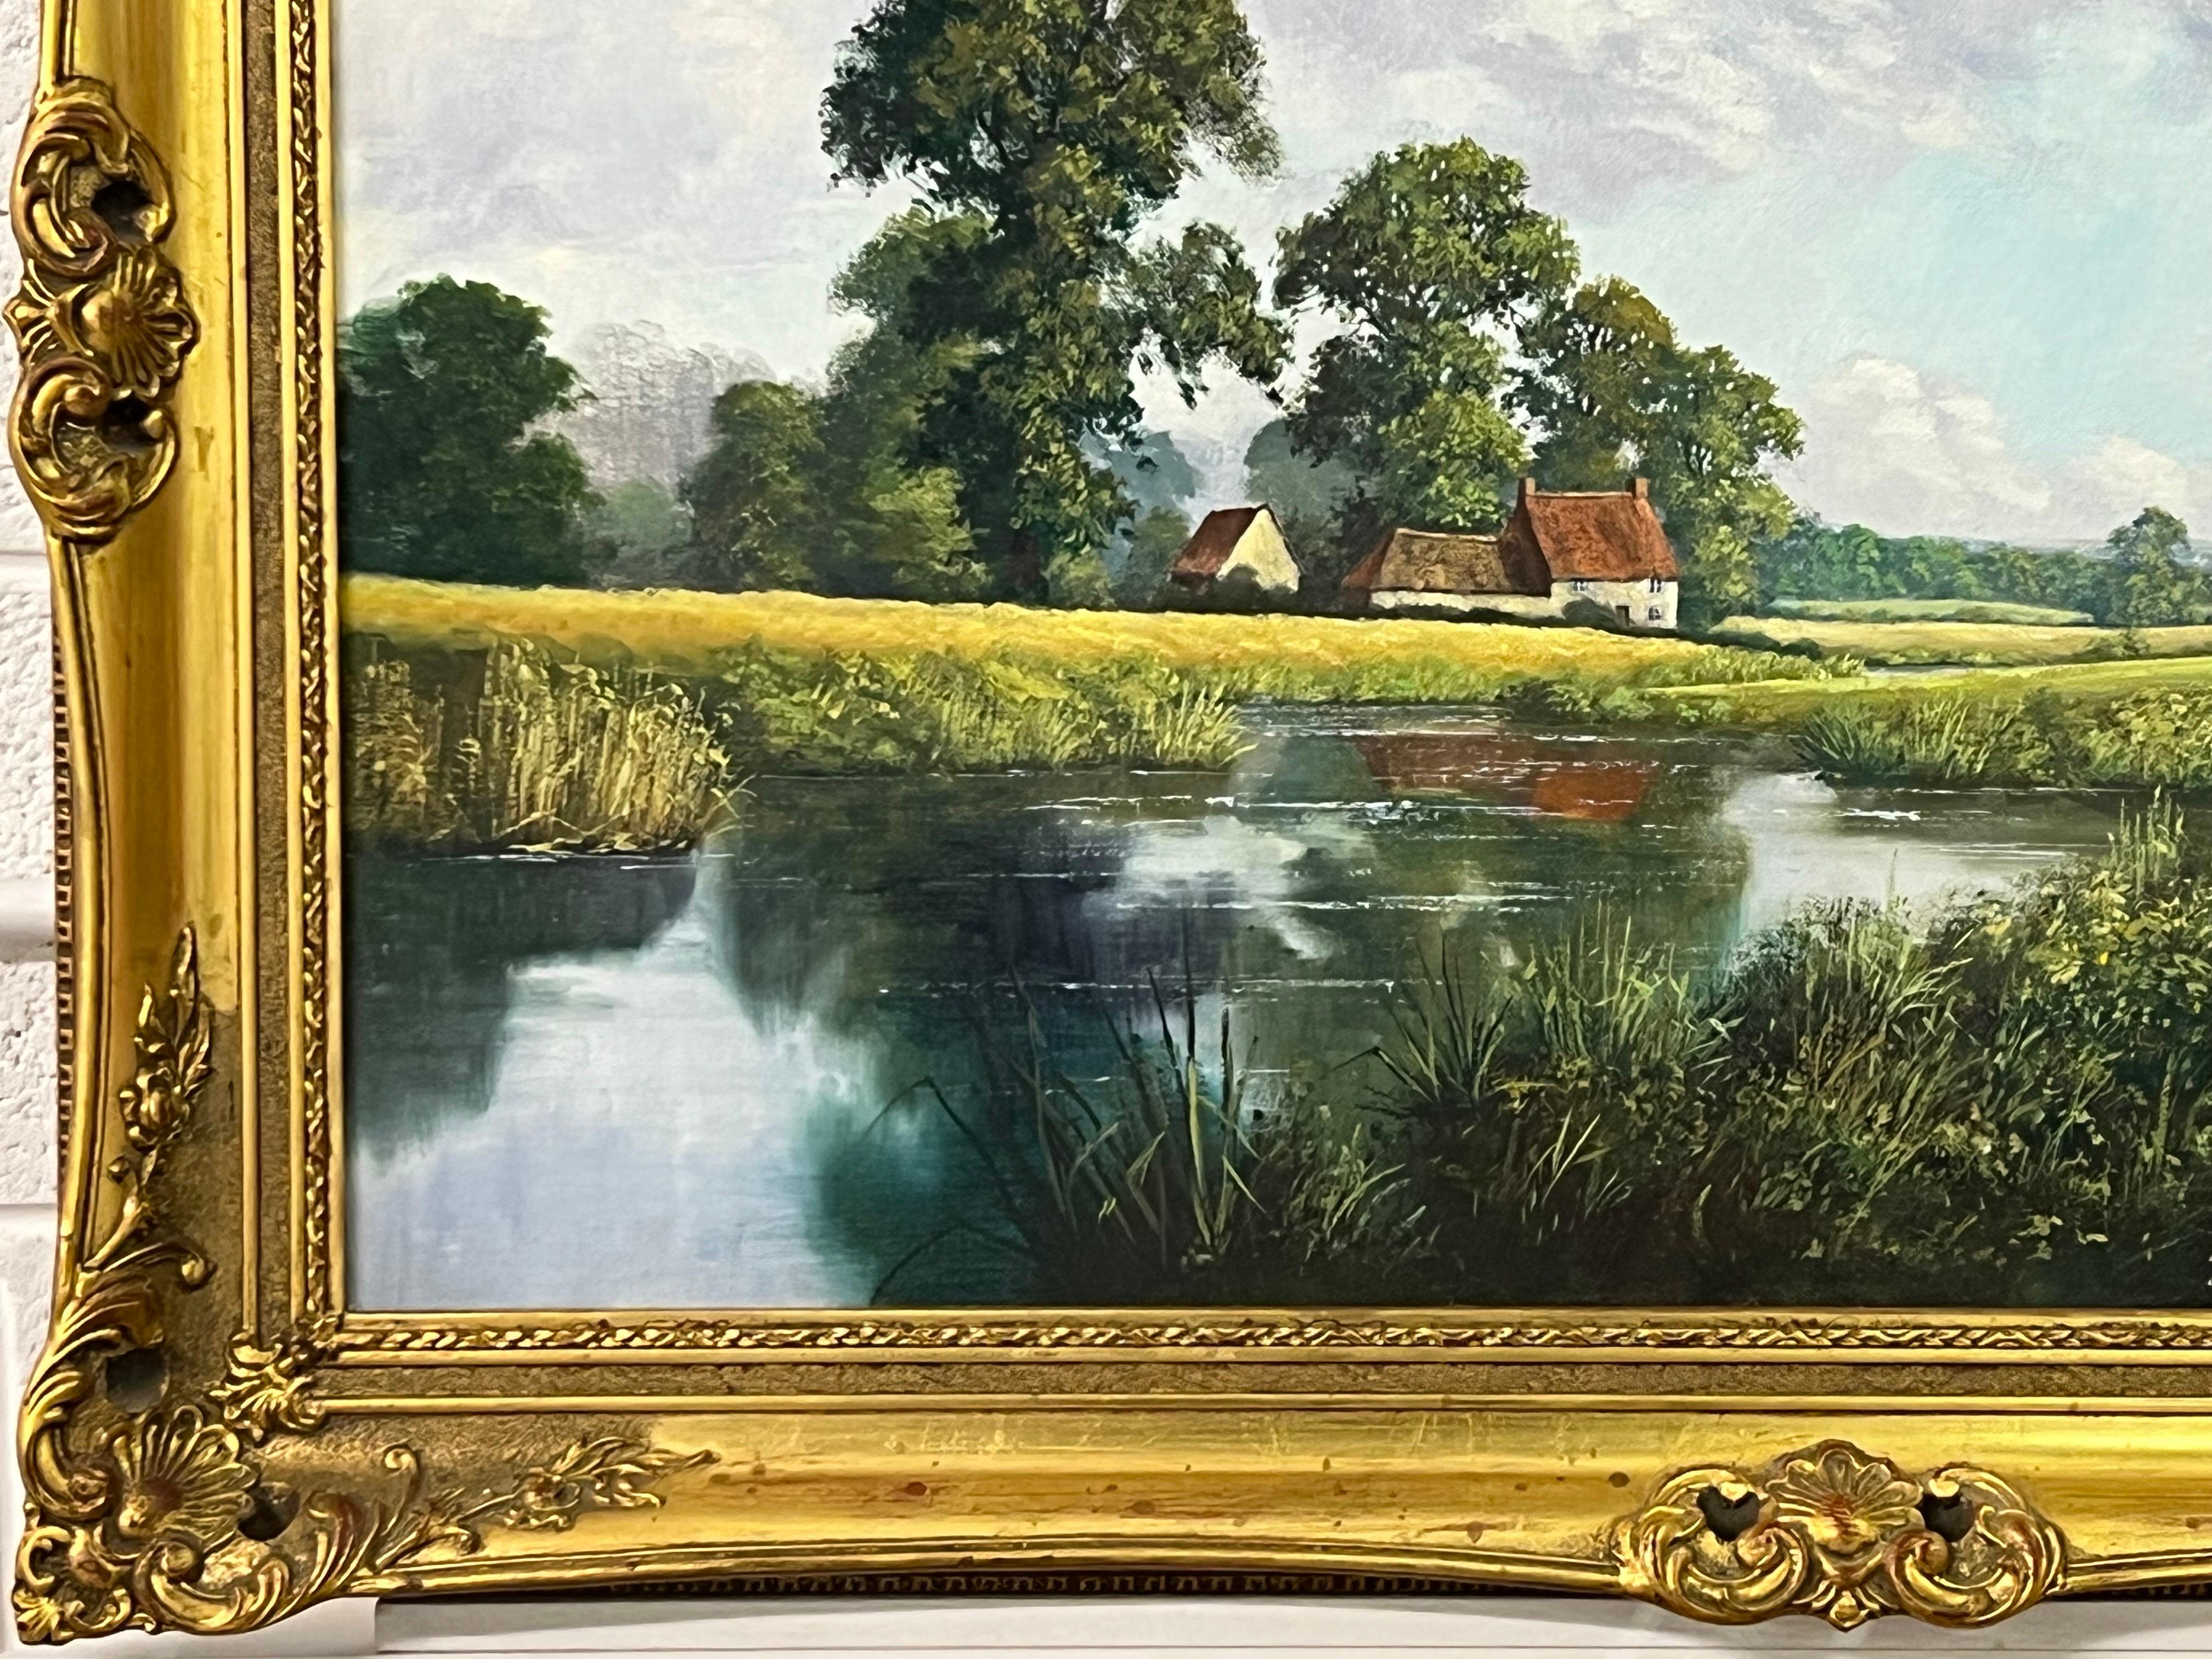 Farmhouse by a River in the English Countryside by 20th Century British Artist 3